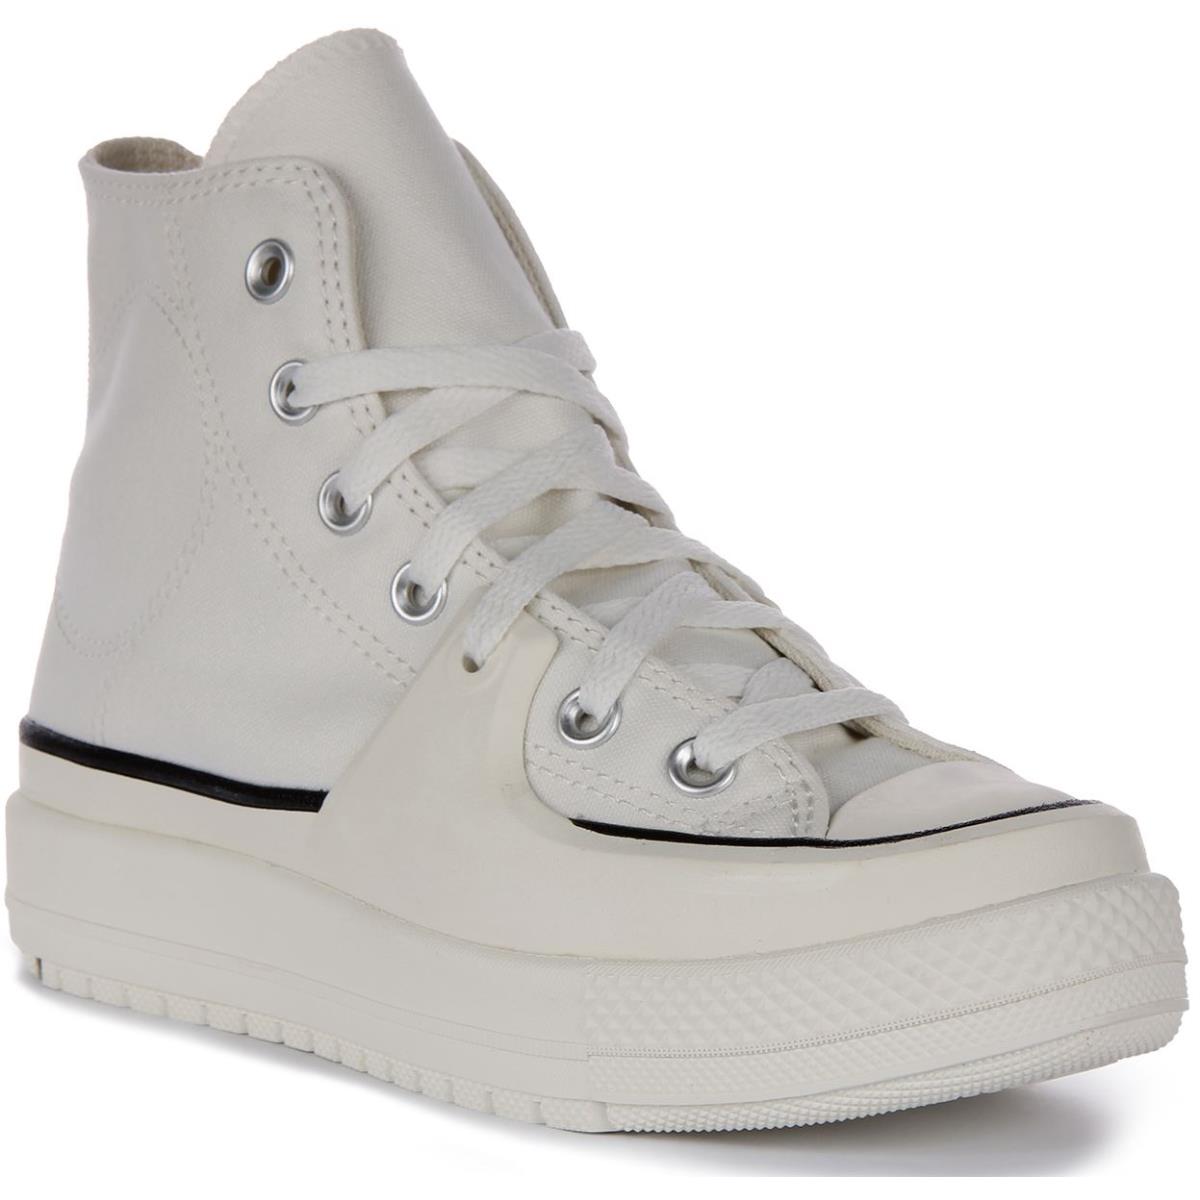 Converse A02832C Chuck Taylor All Star Construct 80s White US 5 - 10 WHITE